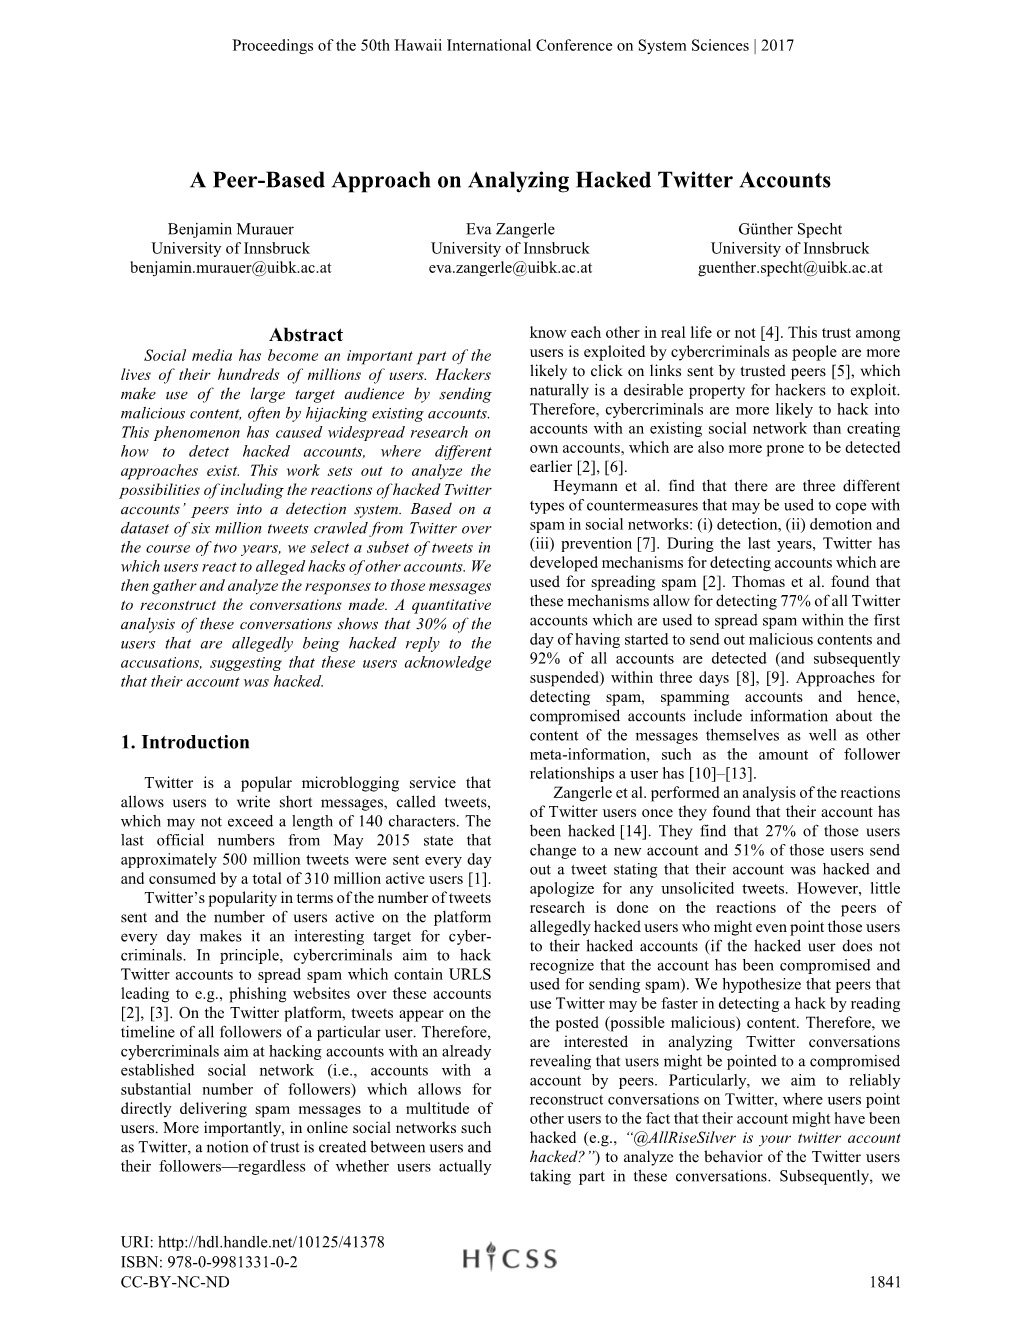 A Peer-Based Approach on Analyzing Hacked Twitter Accounts